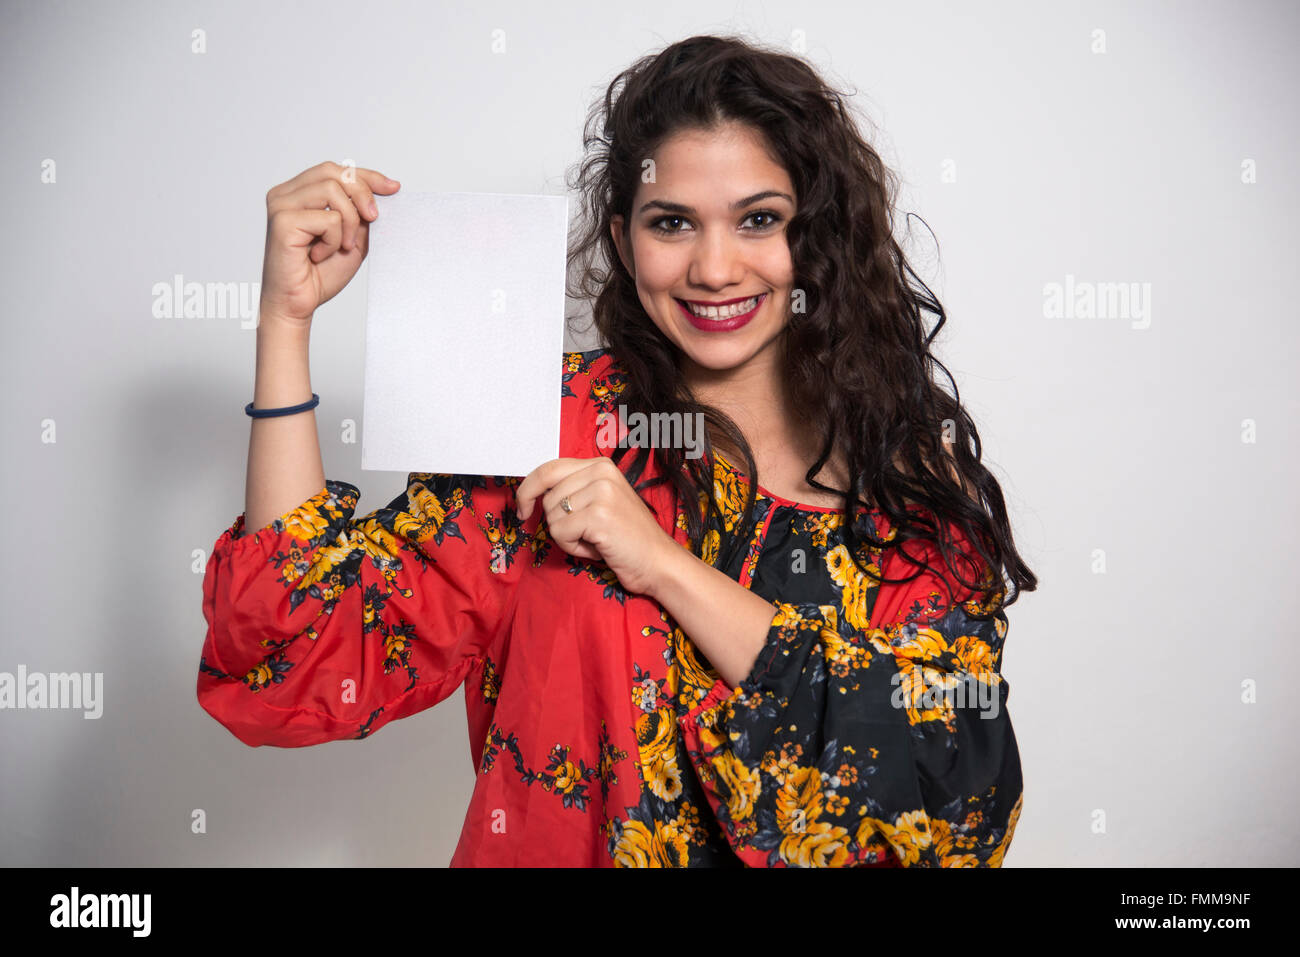 Portrait of a Latin woman with sign Stock Photo - Alamy